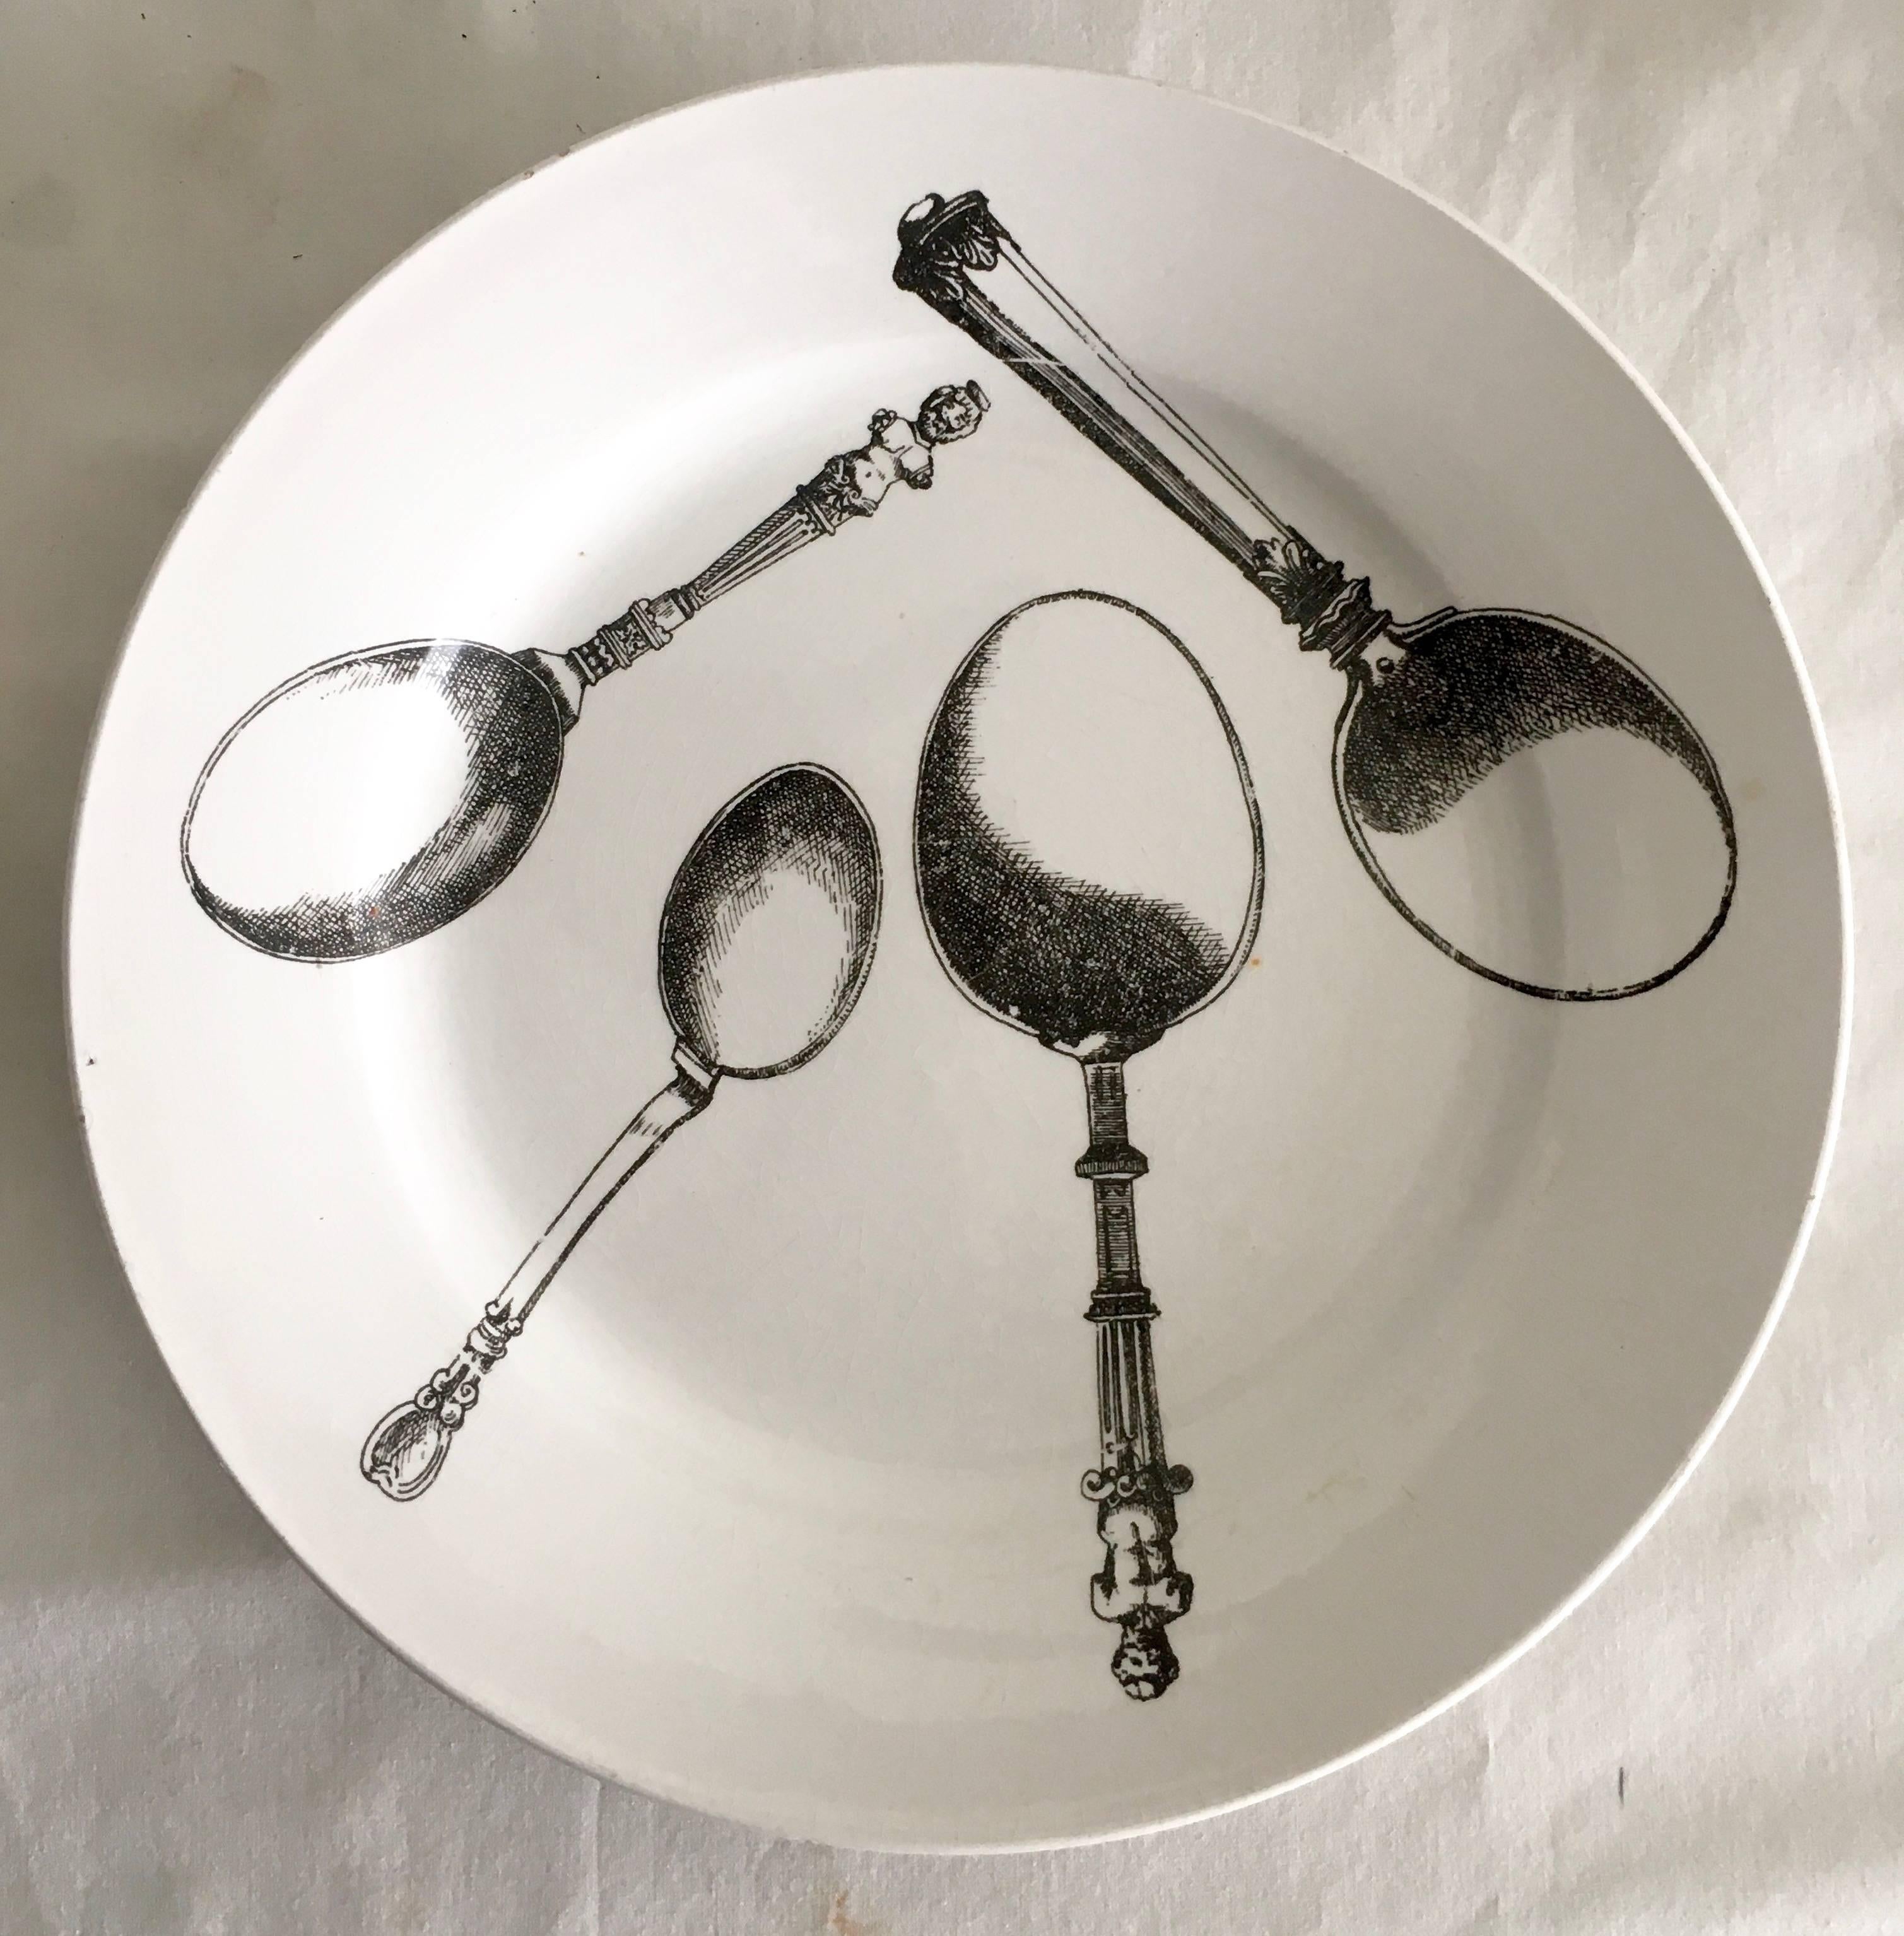 Pierro Fornasetti, never missing a genre. Pair of rare Fornasetti Italy plates with utensils, suitable for eating, decor or admiring.

